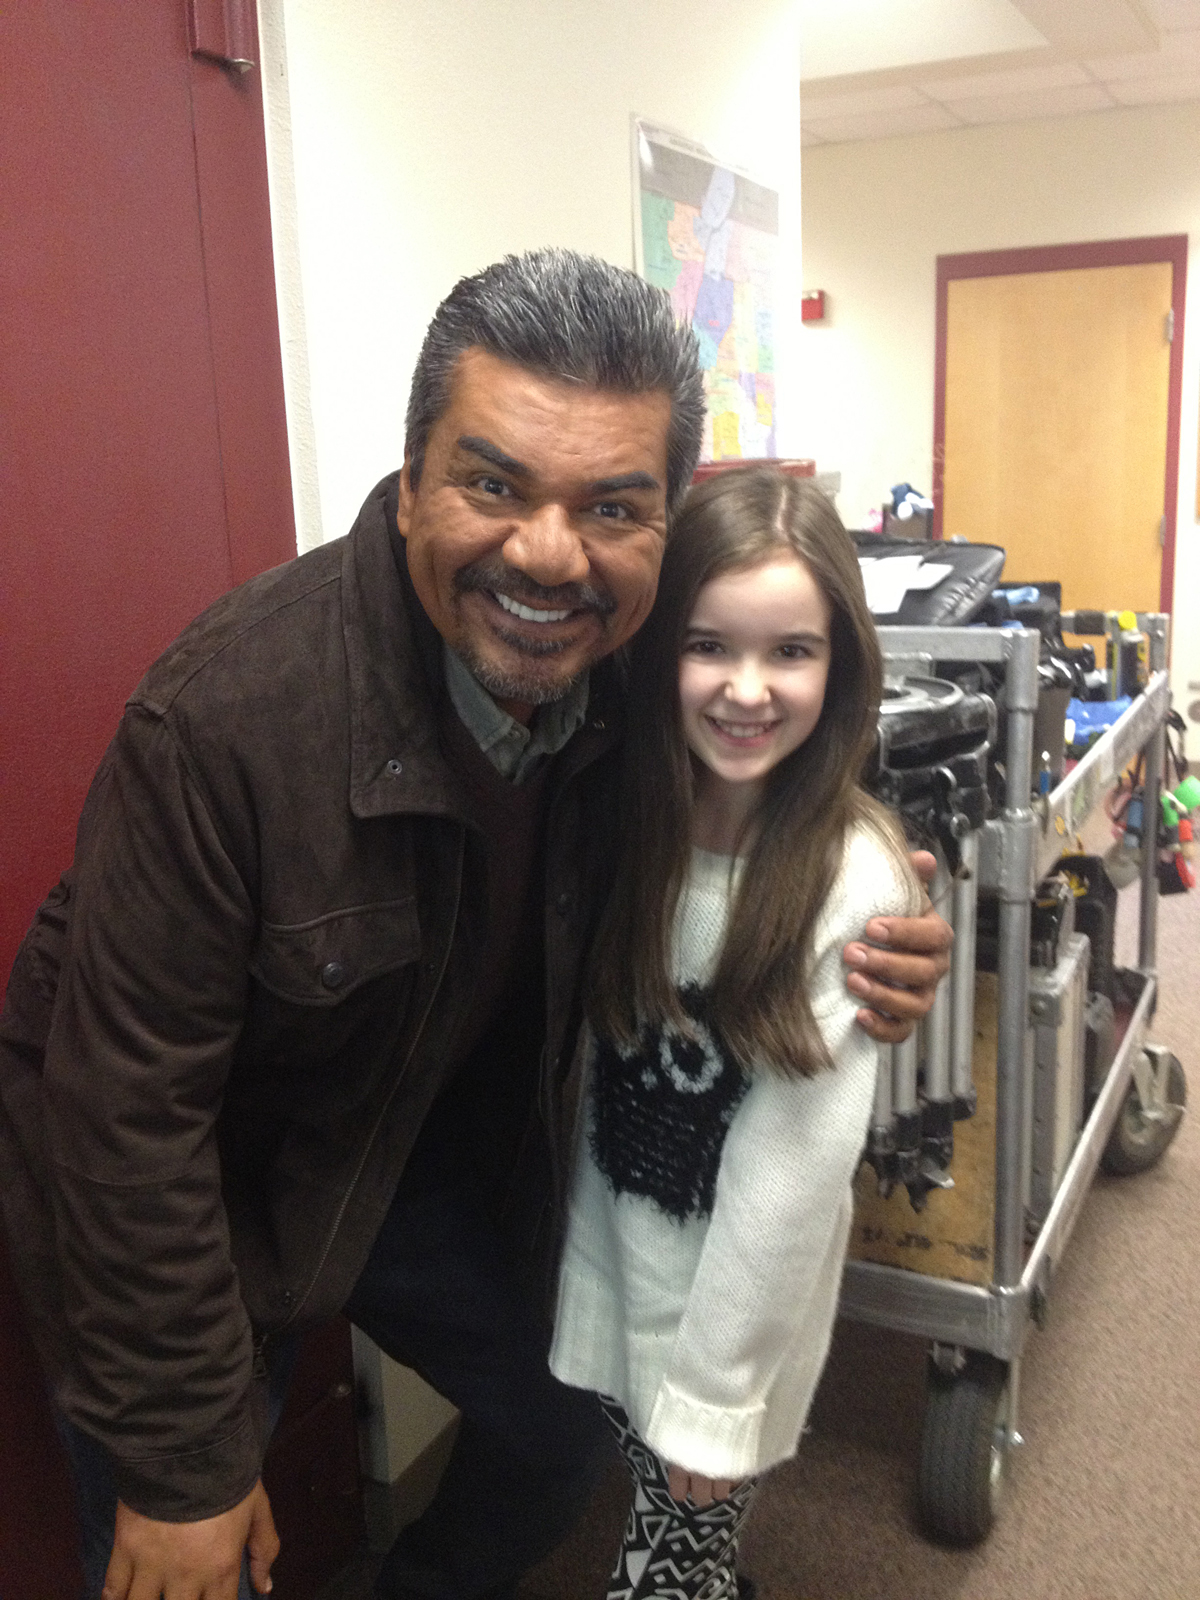 George Lopez and me working on the set of La Vida Robot the movie in Albuquerque.